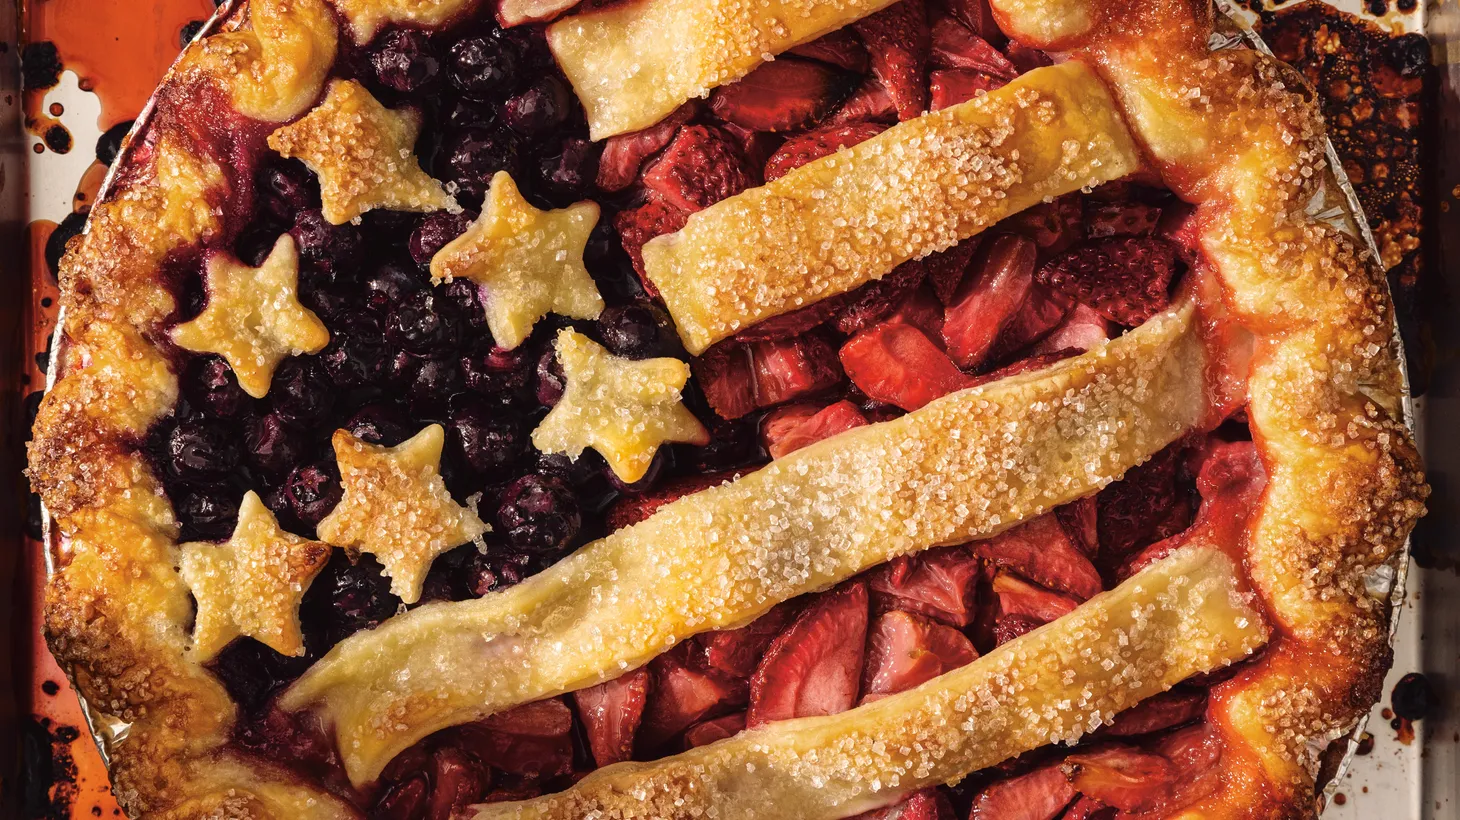 Double butter crust, strawberries, and blueberries comprise this patriotic stars and stripes pie.